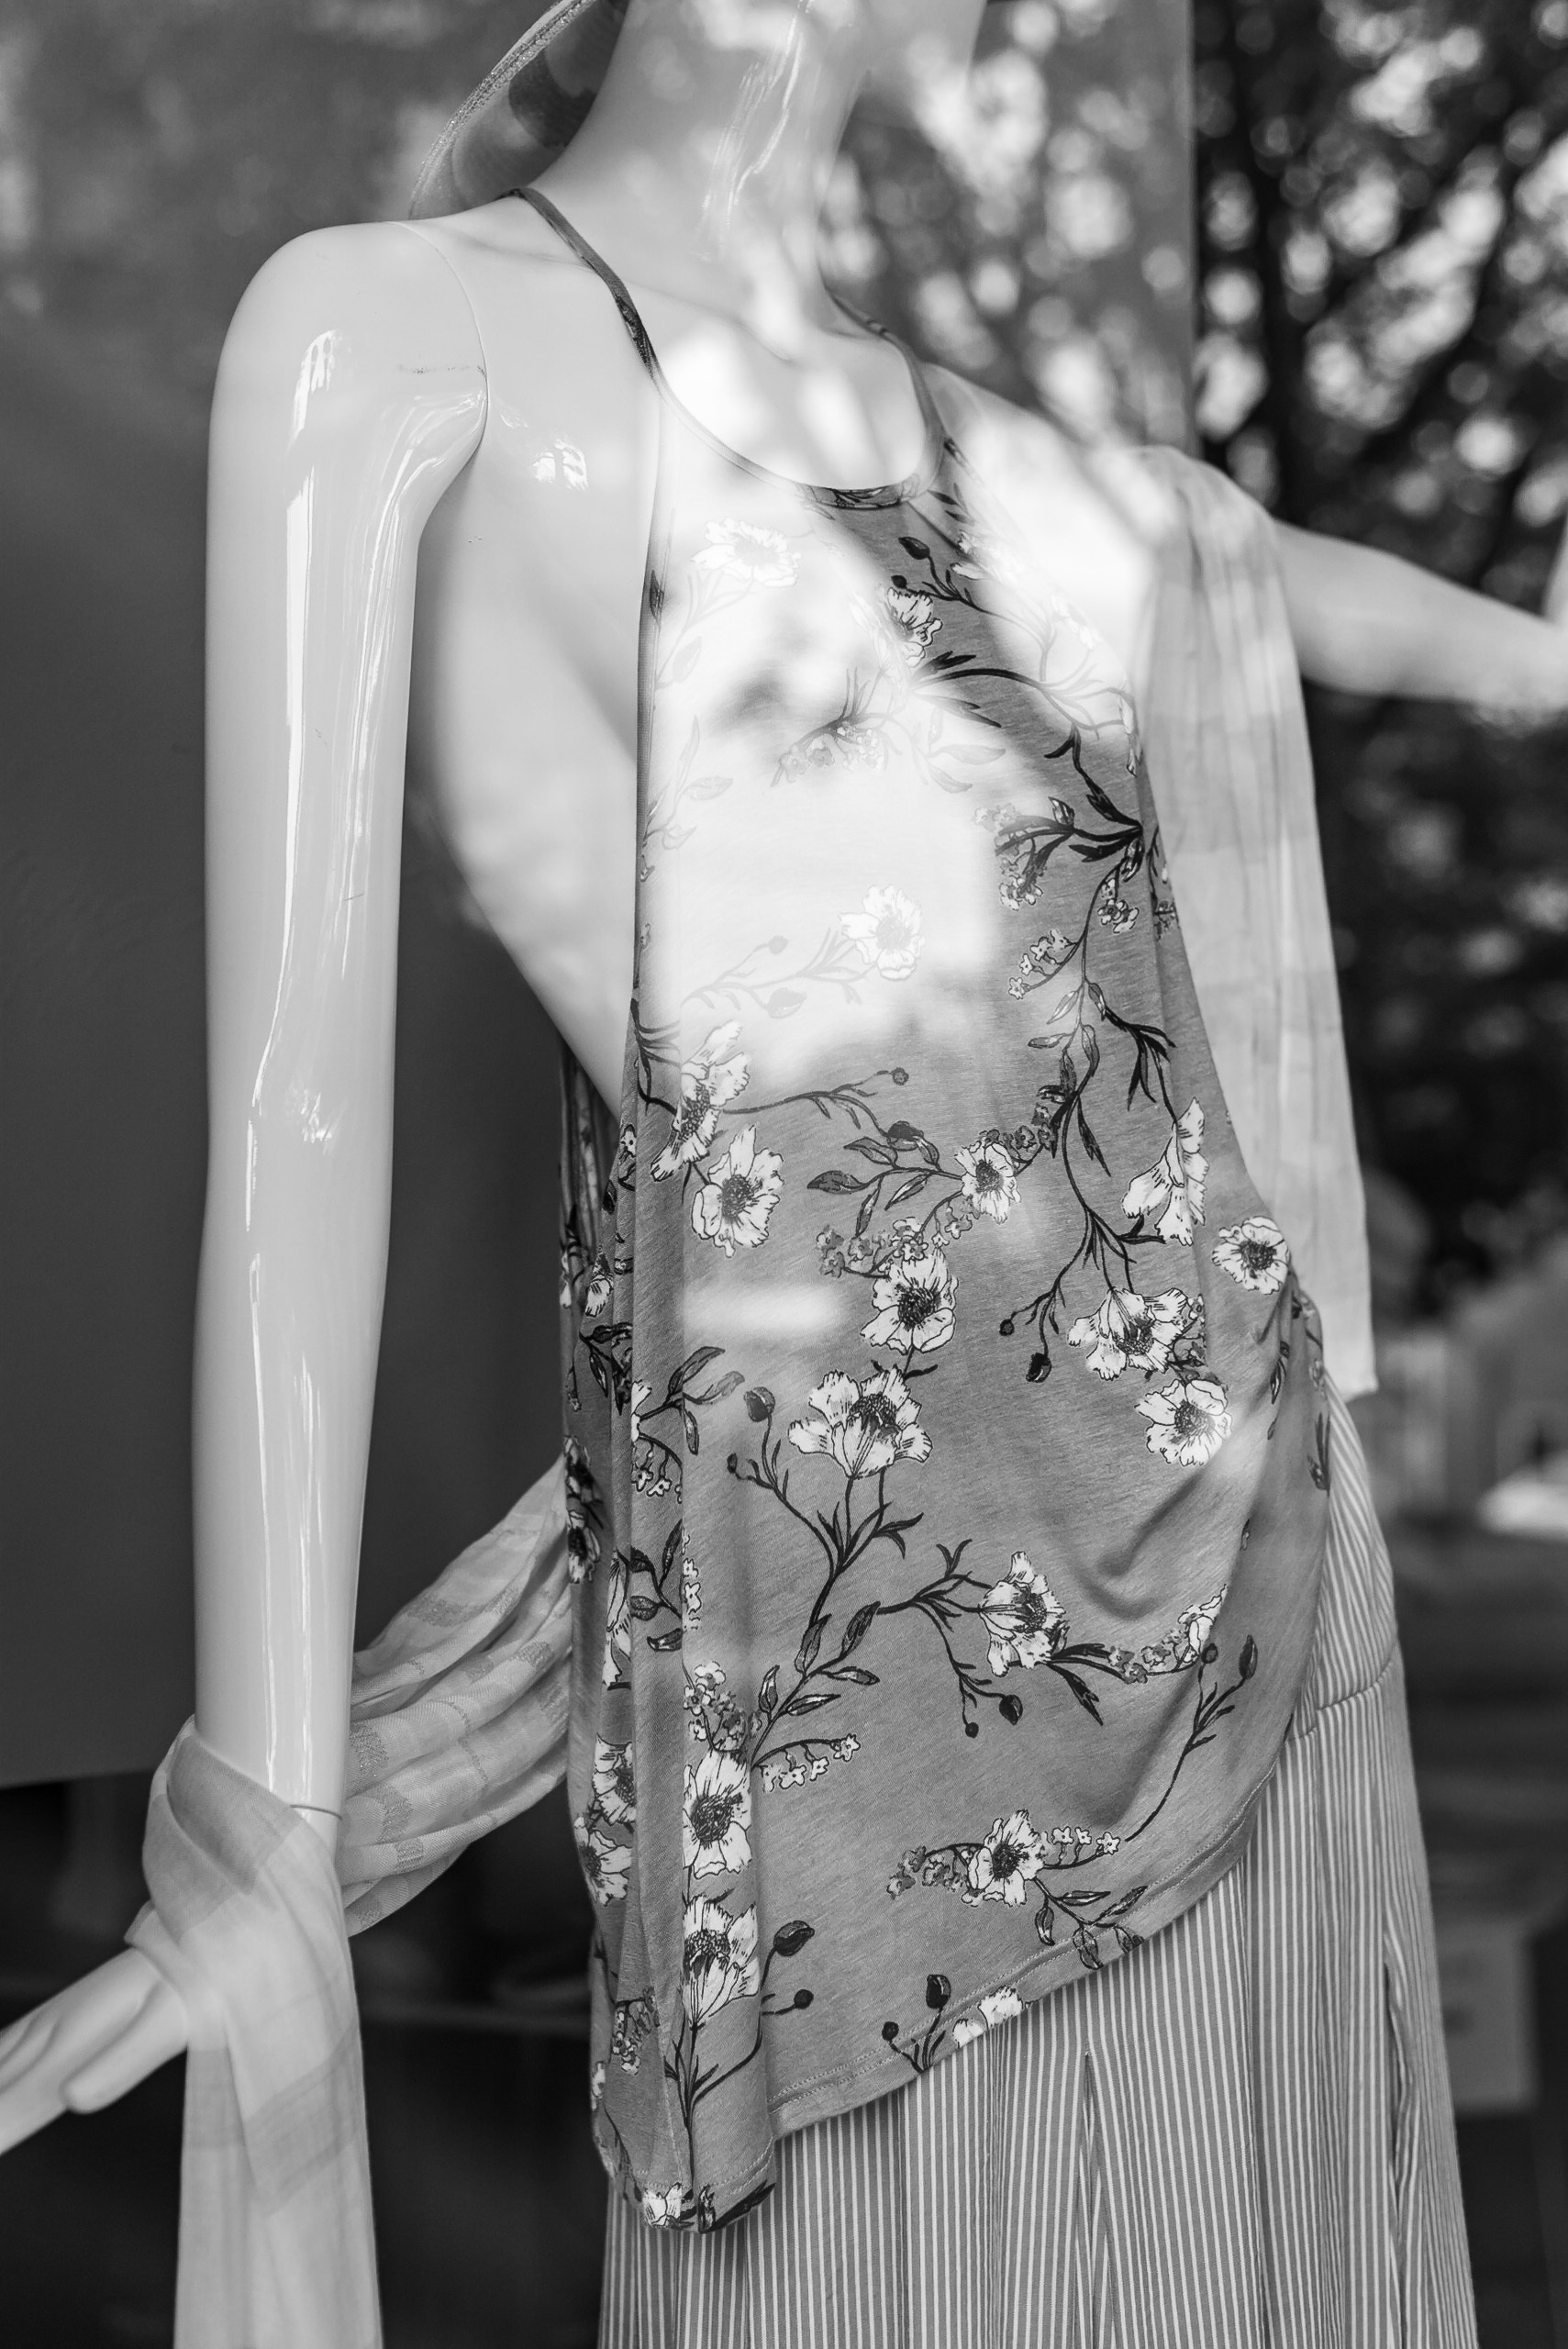 Shop mannequin wearing a floral, loosely draped, halter top and thinly stripped skirt.